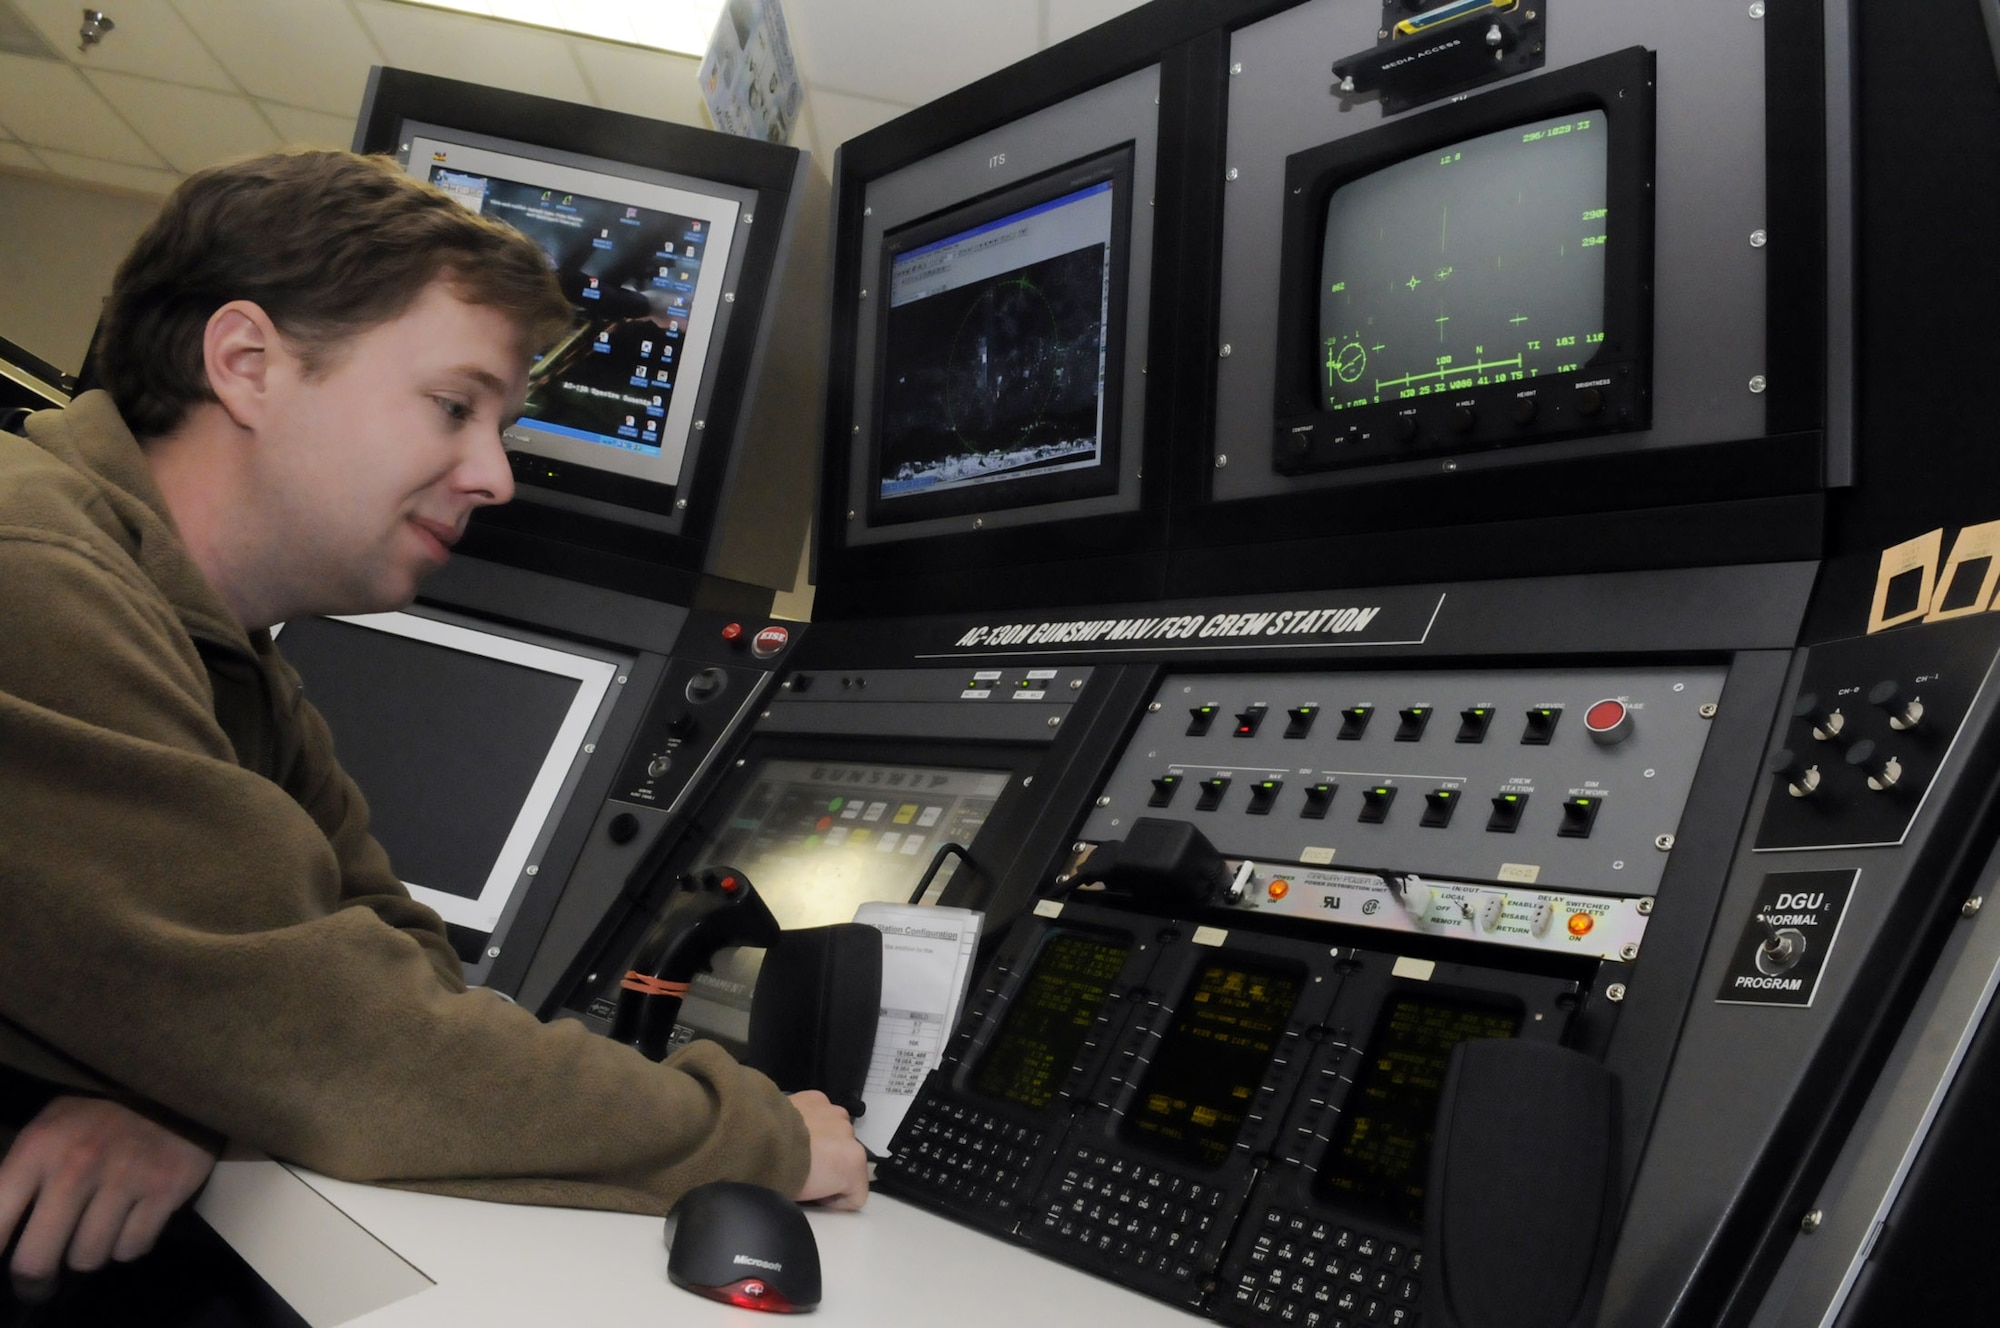 Tim Doughty, test engineer, works at the C-130 Gunship console which shows how avionics and firing software might work when used on an aircraft. U. S. Air Force photo by Sue Sapp